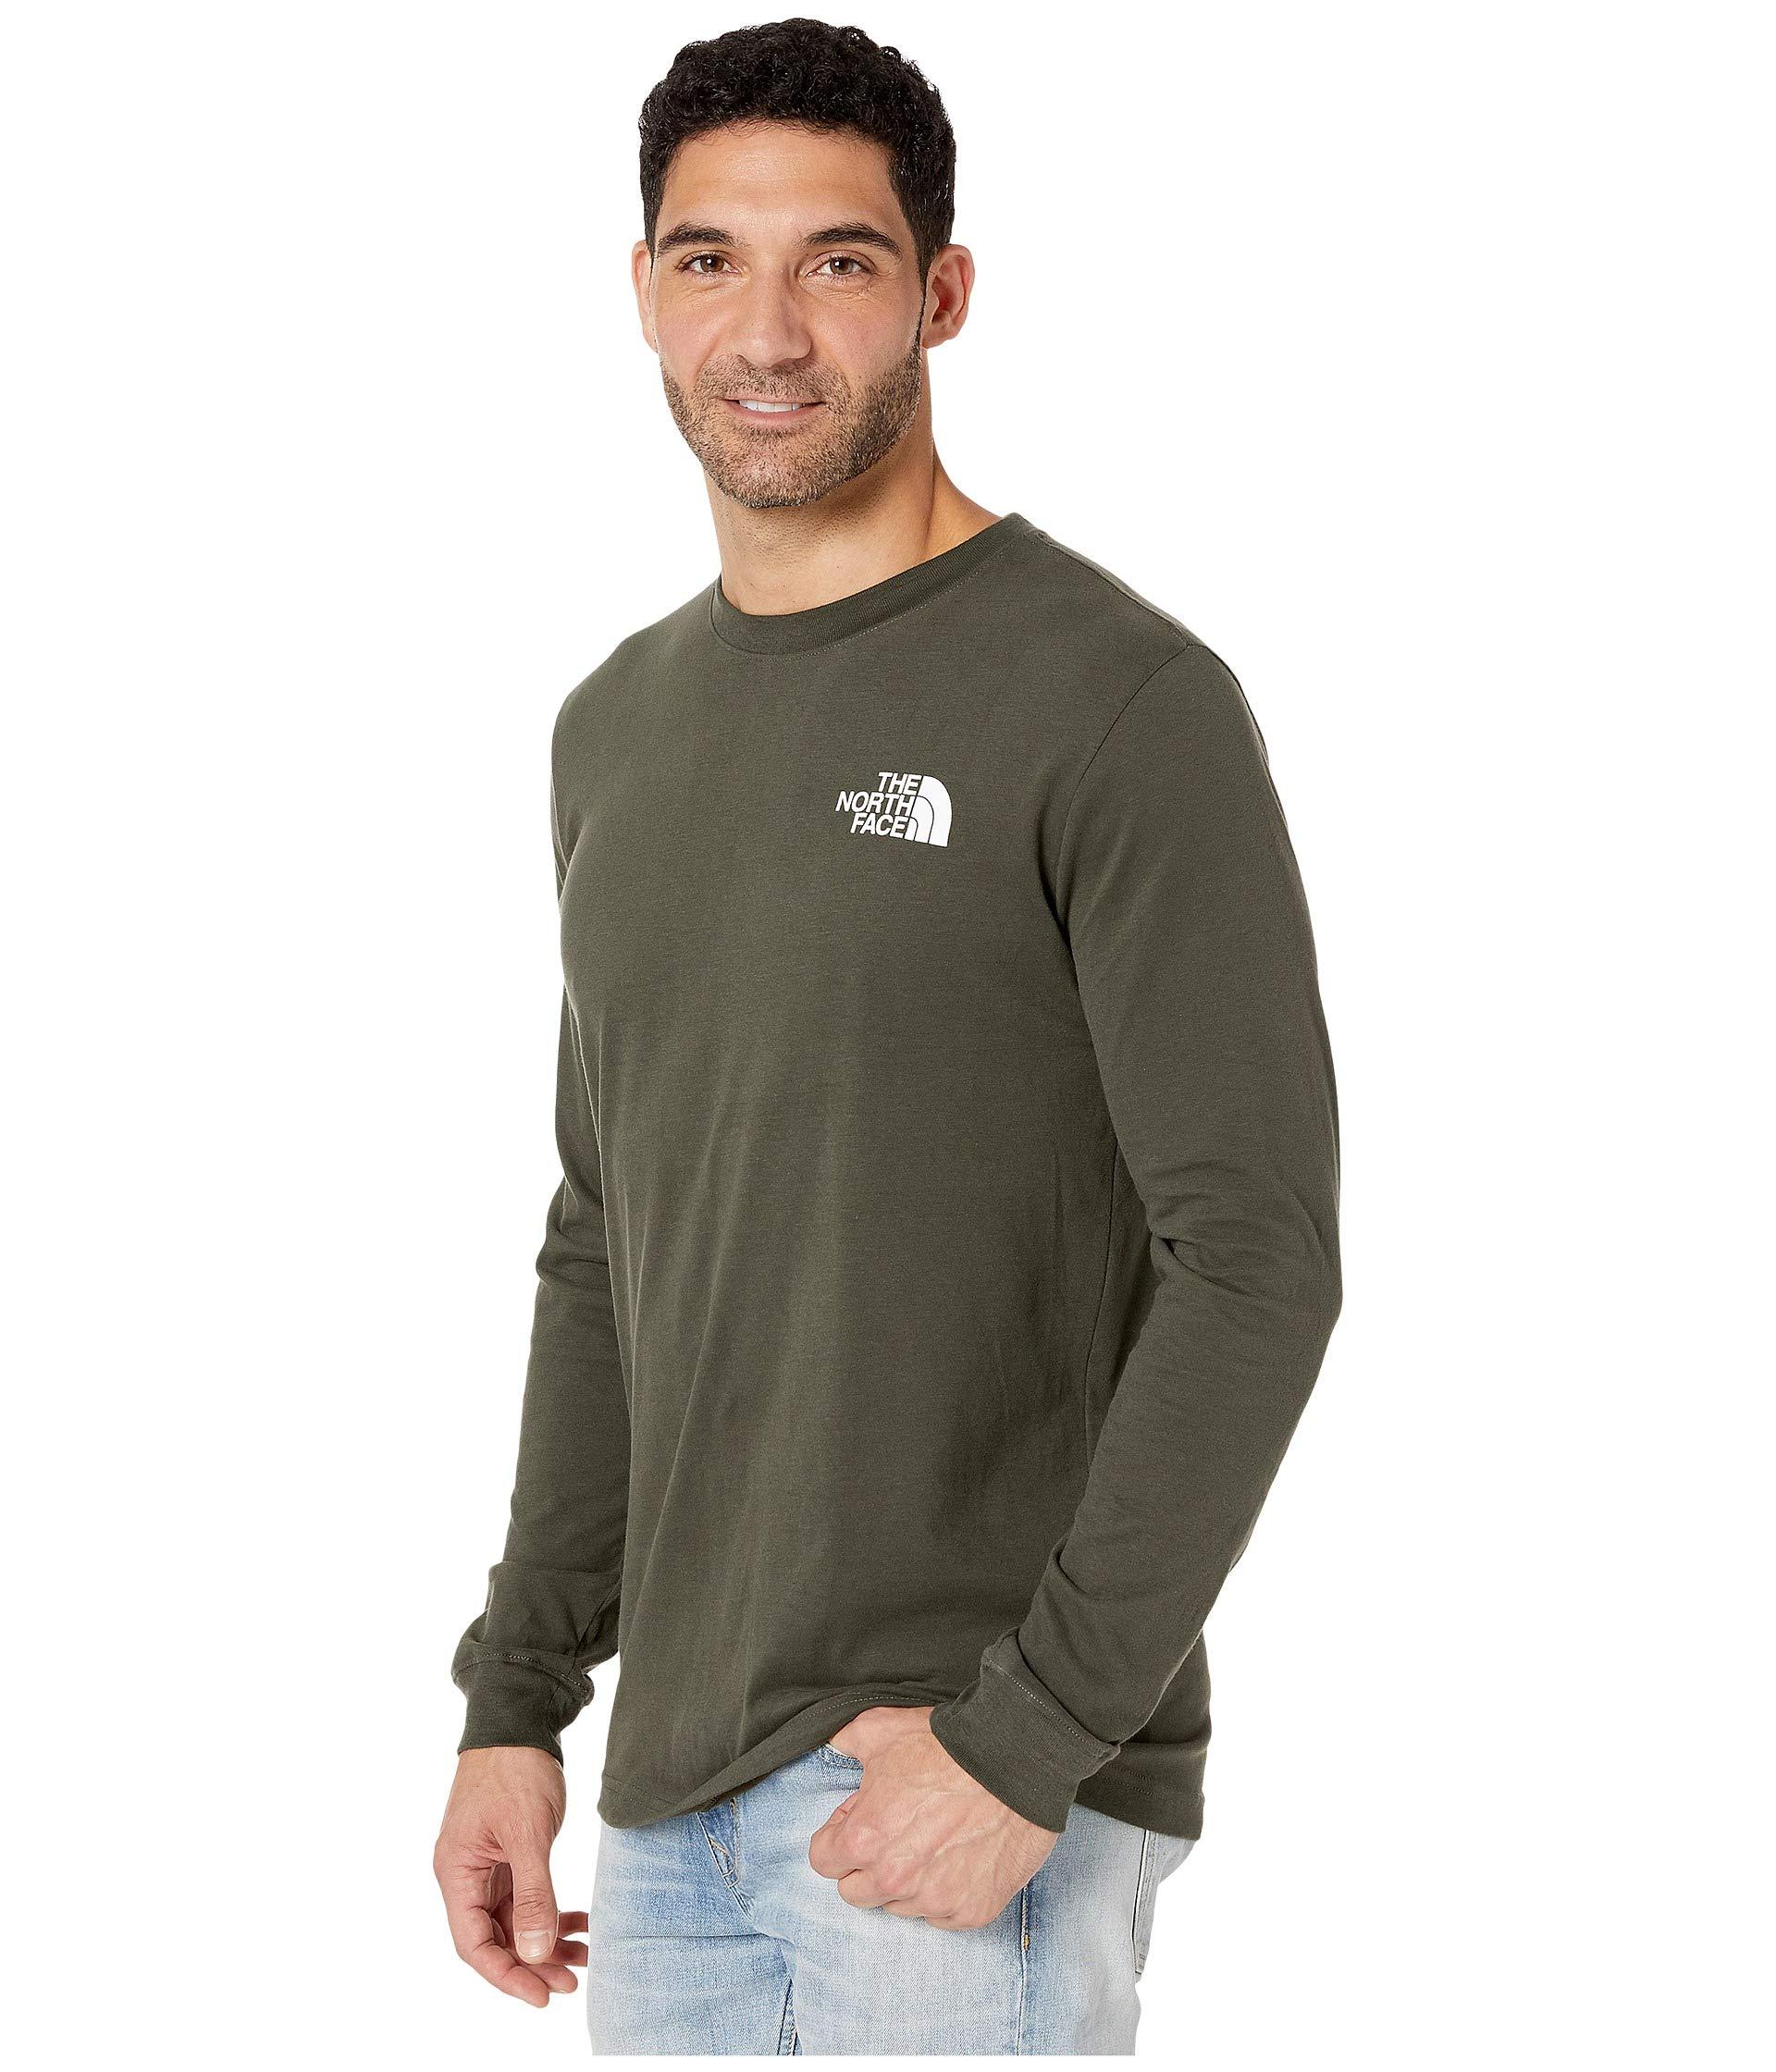 The North Face Cotton Long Sleeve Red Box T-shirt in Brown for Men - Lyst